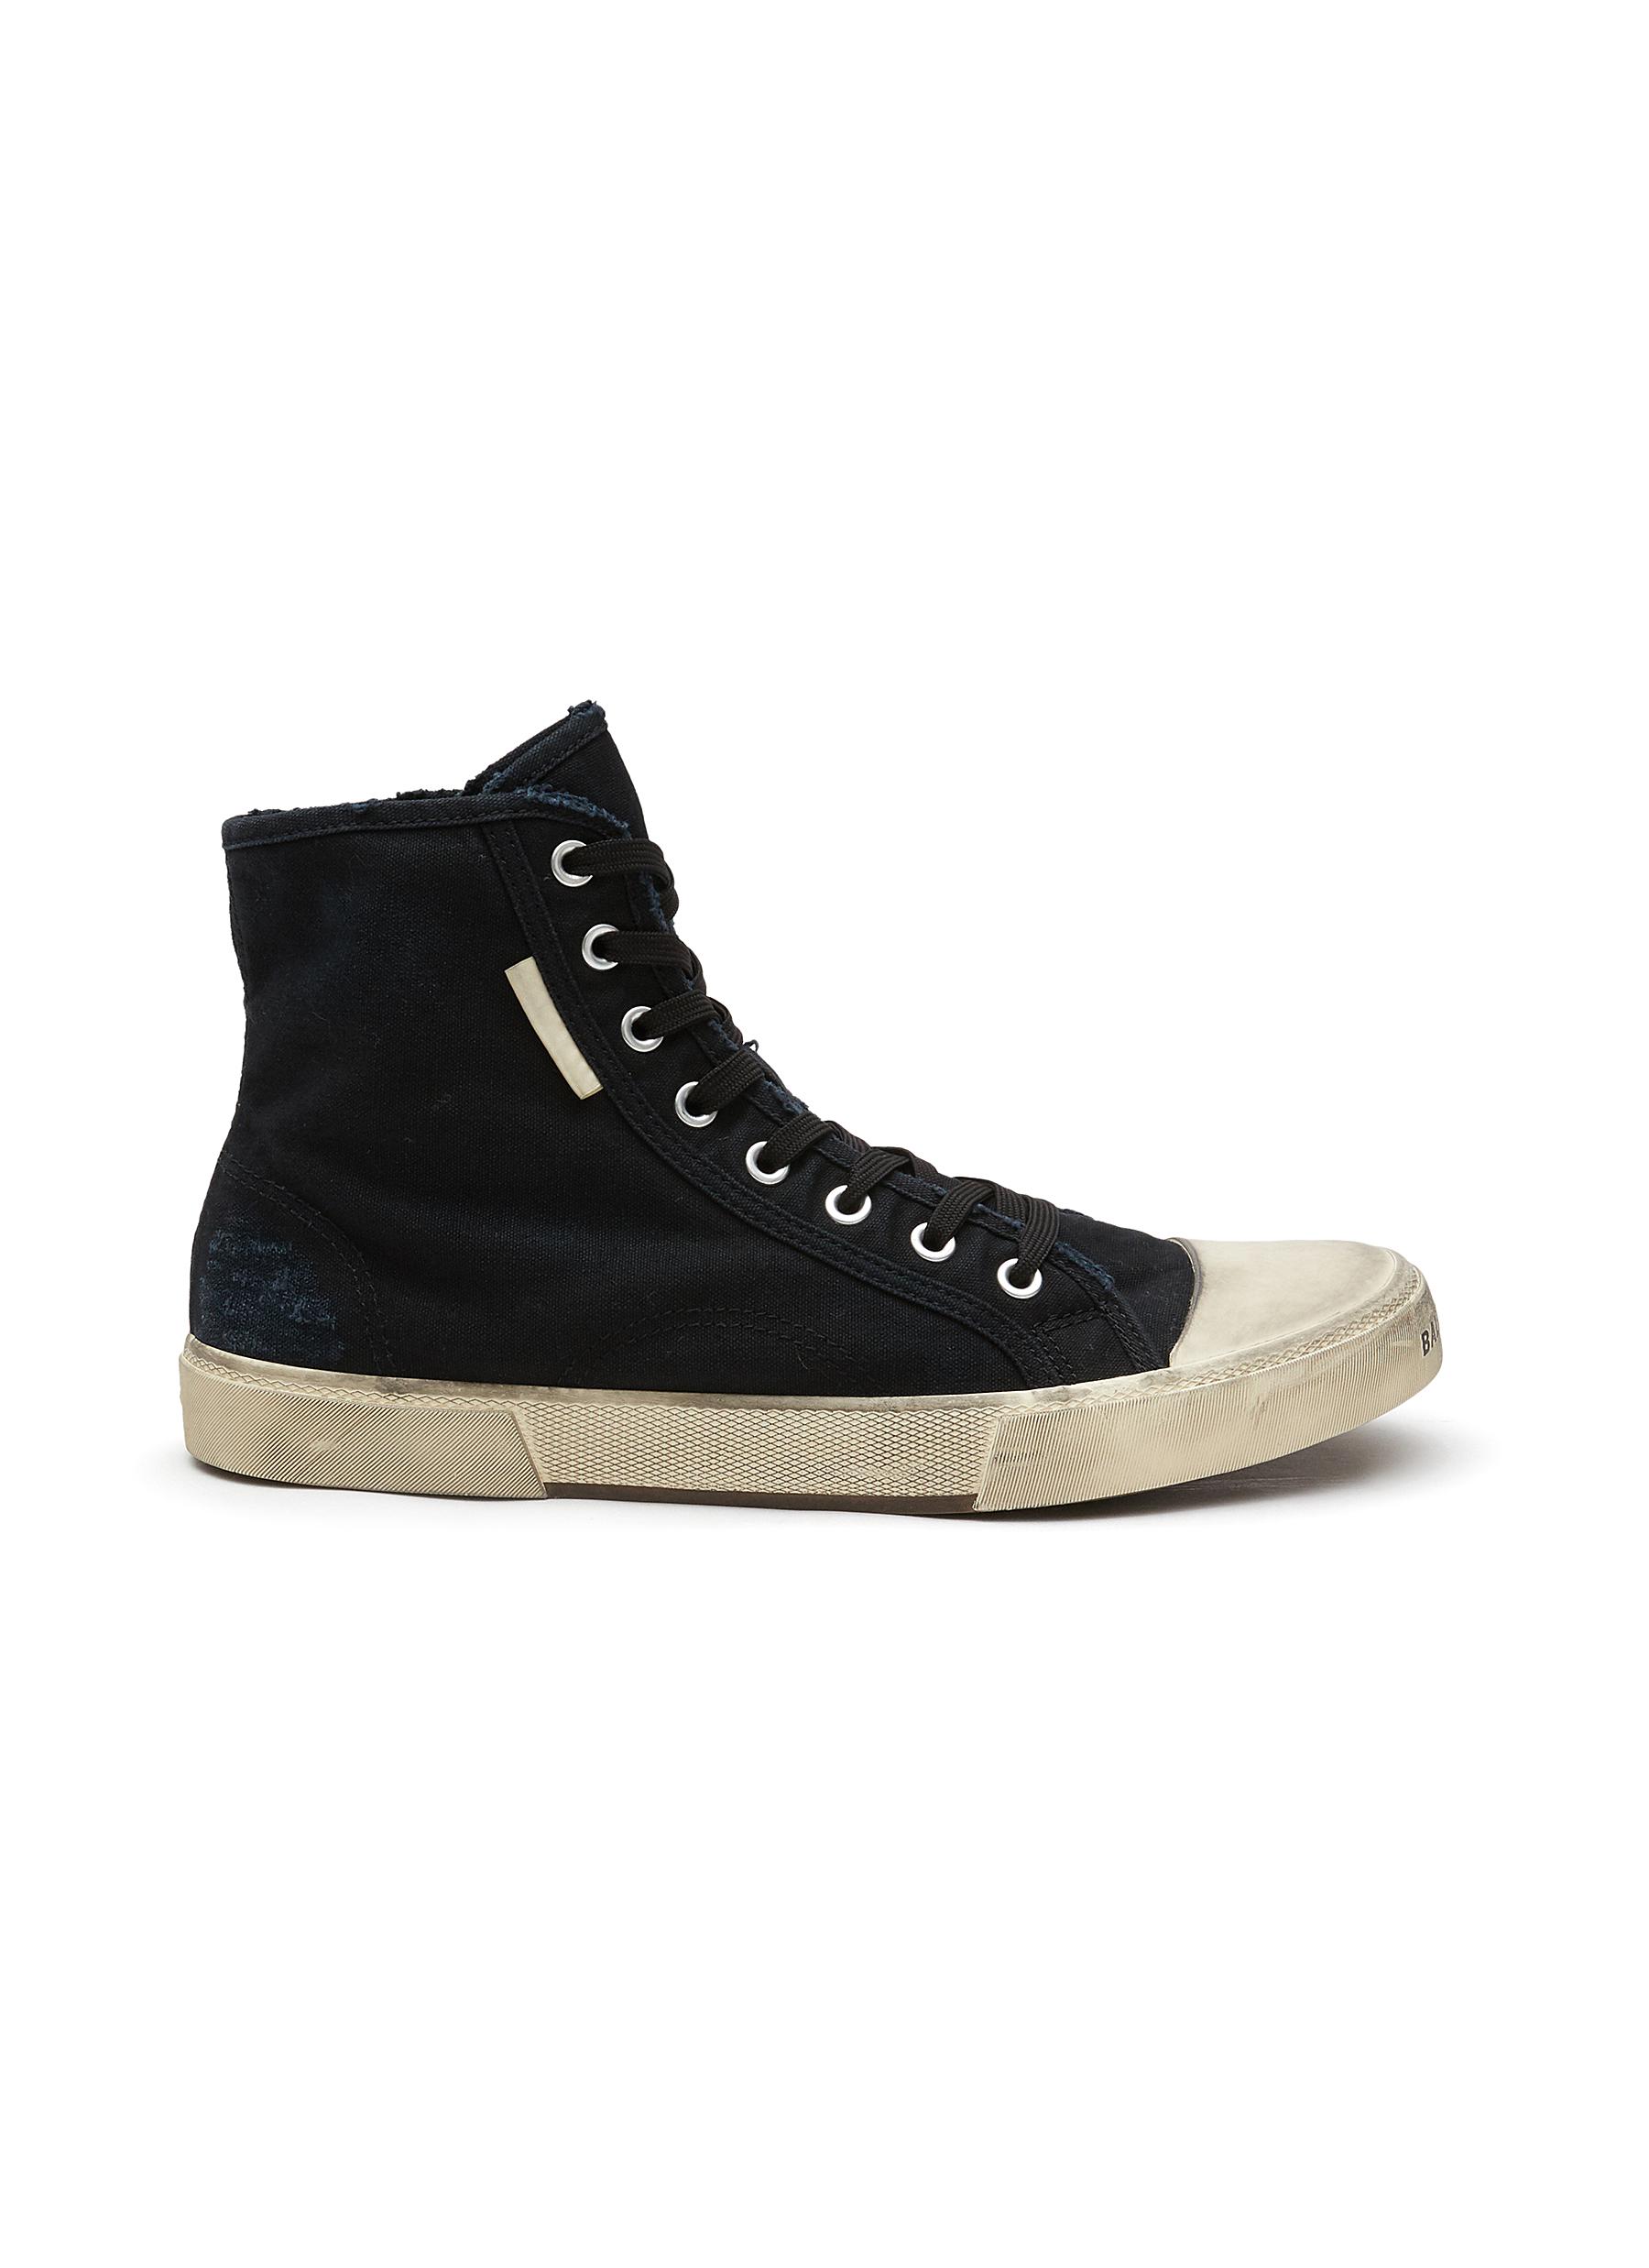 ‘PARIS' HIGH TOP LACE UP SNEAKERS